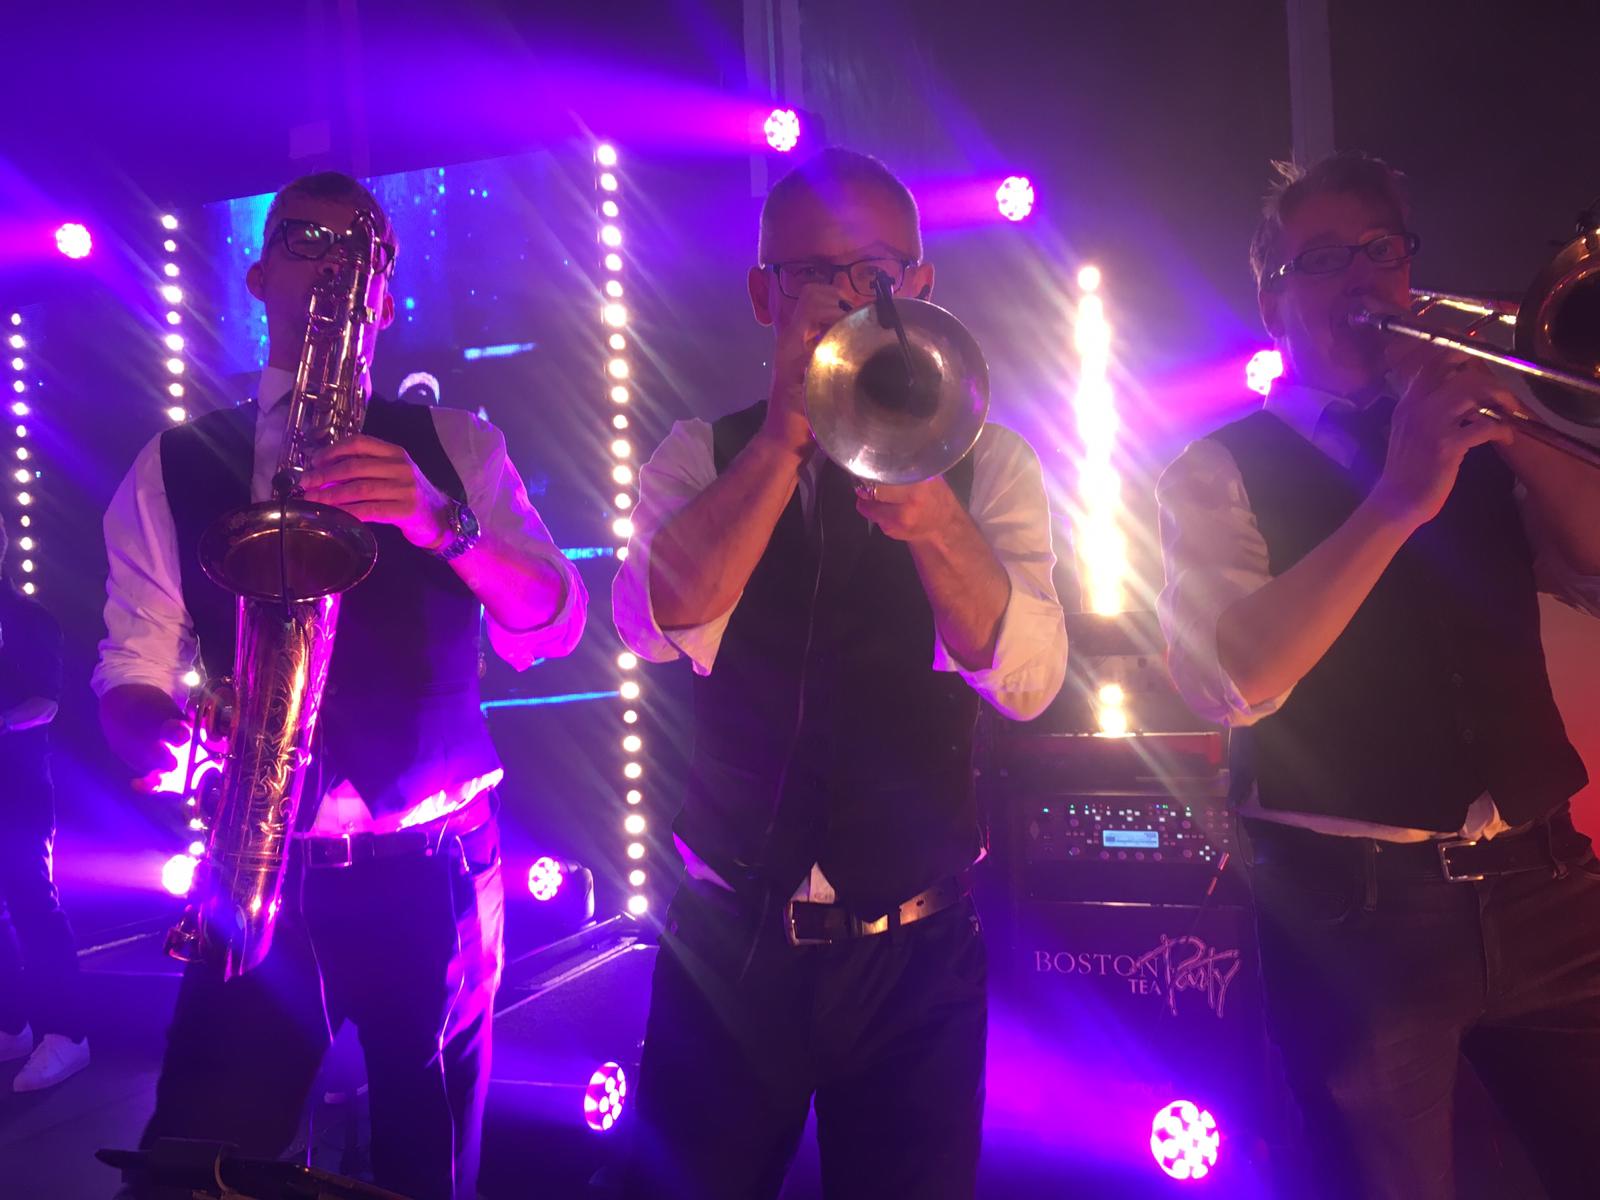 Event on trend met de leukste party-, cover-, of bigband | feestband.com